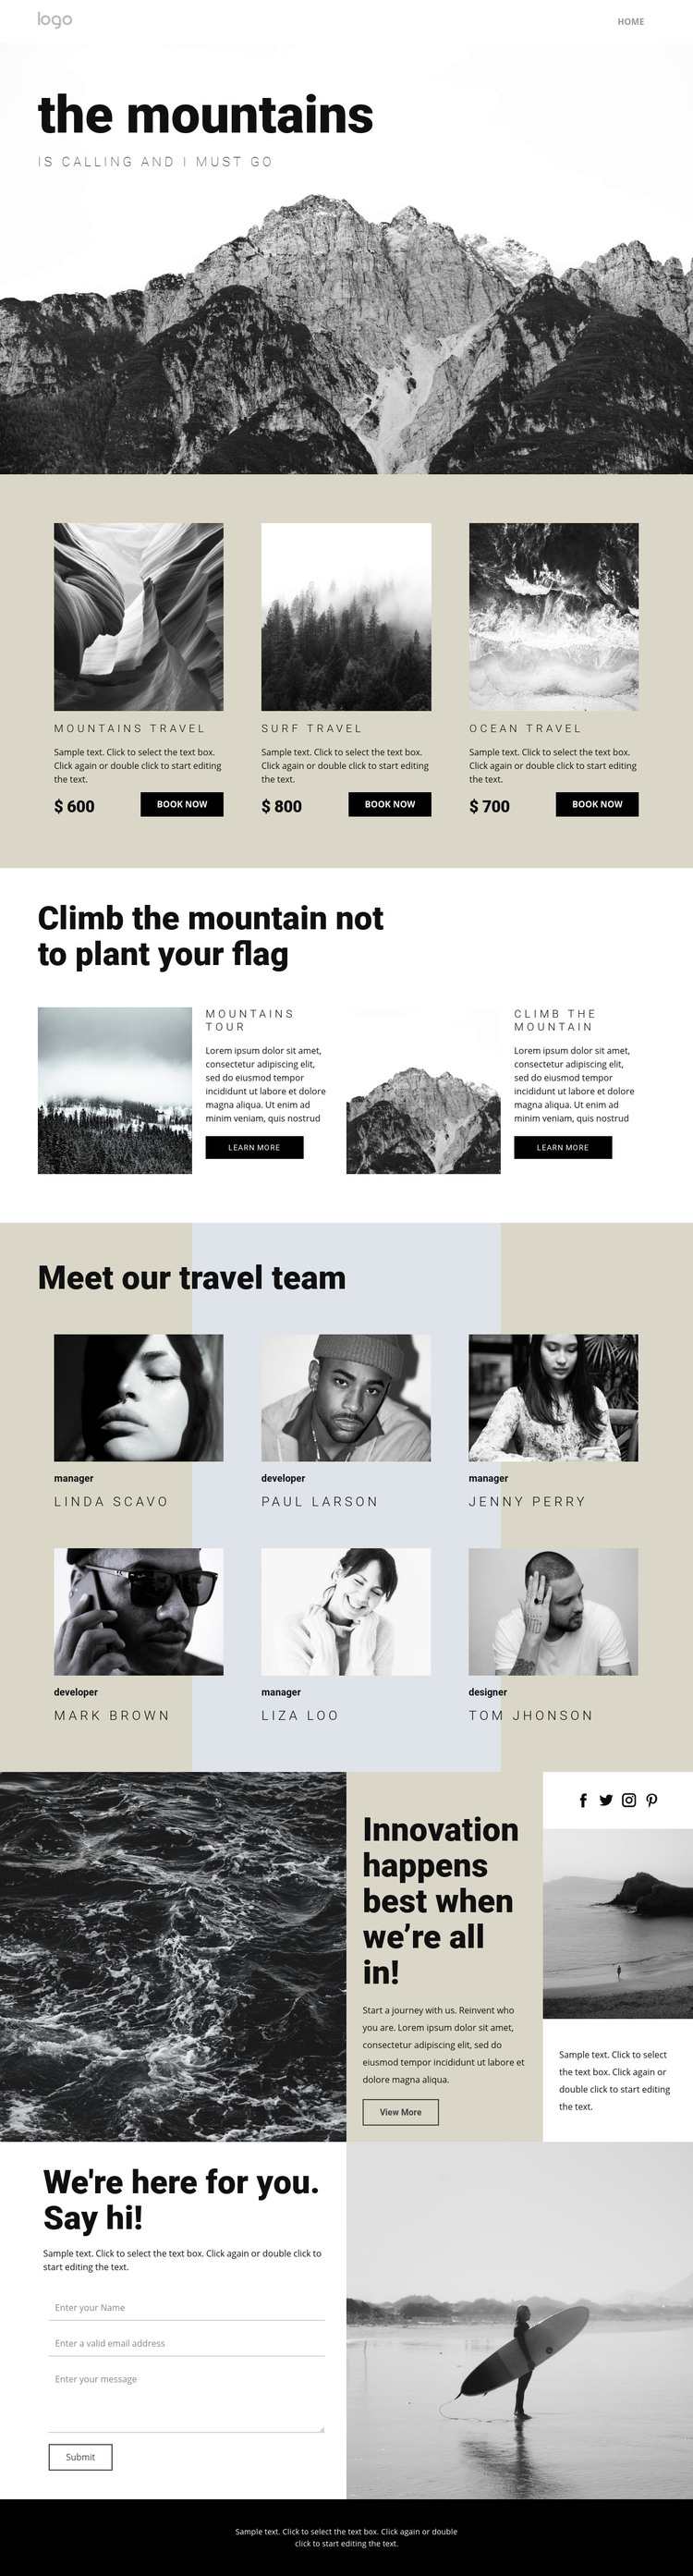 Agency for people who travel Homepage Design